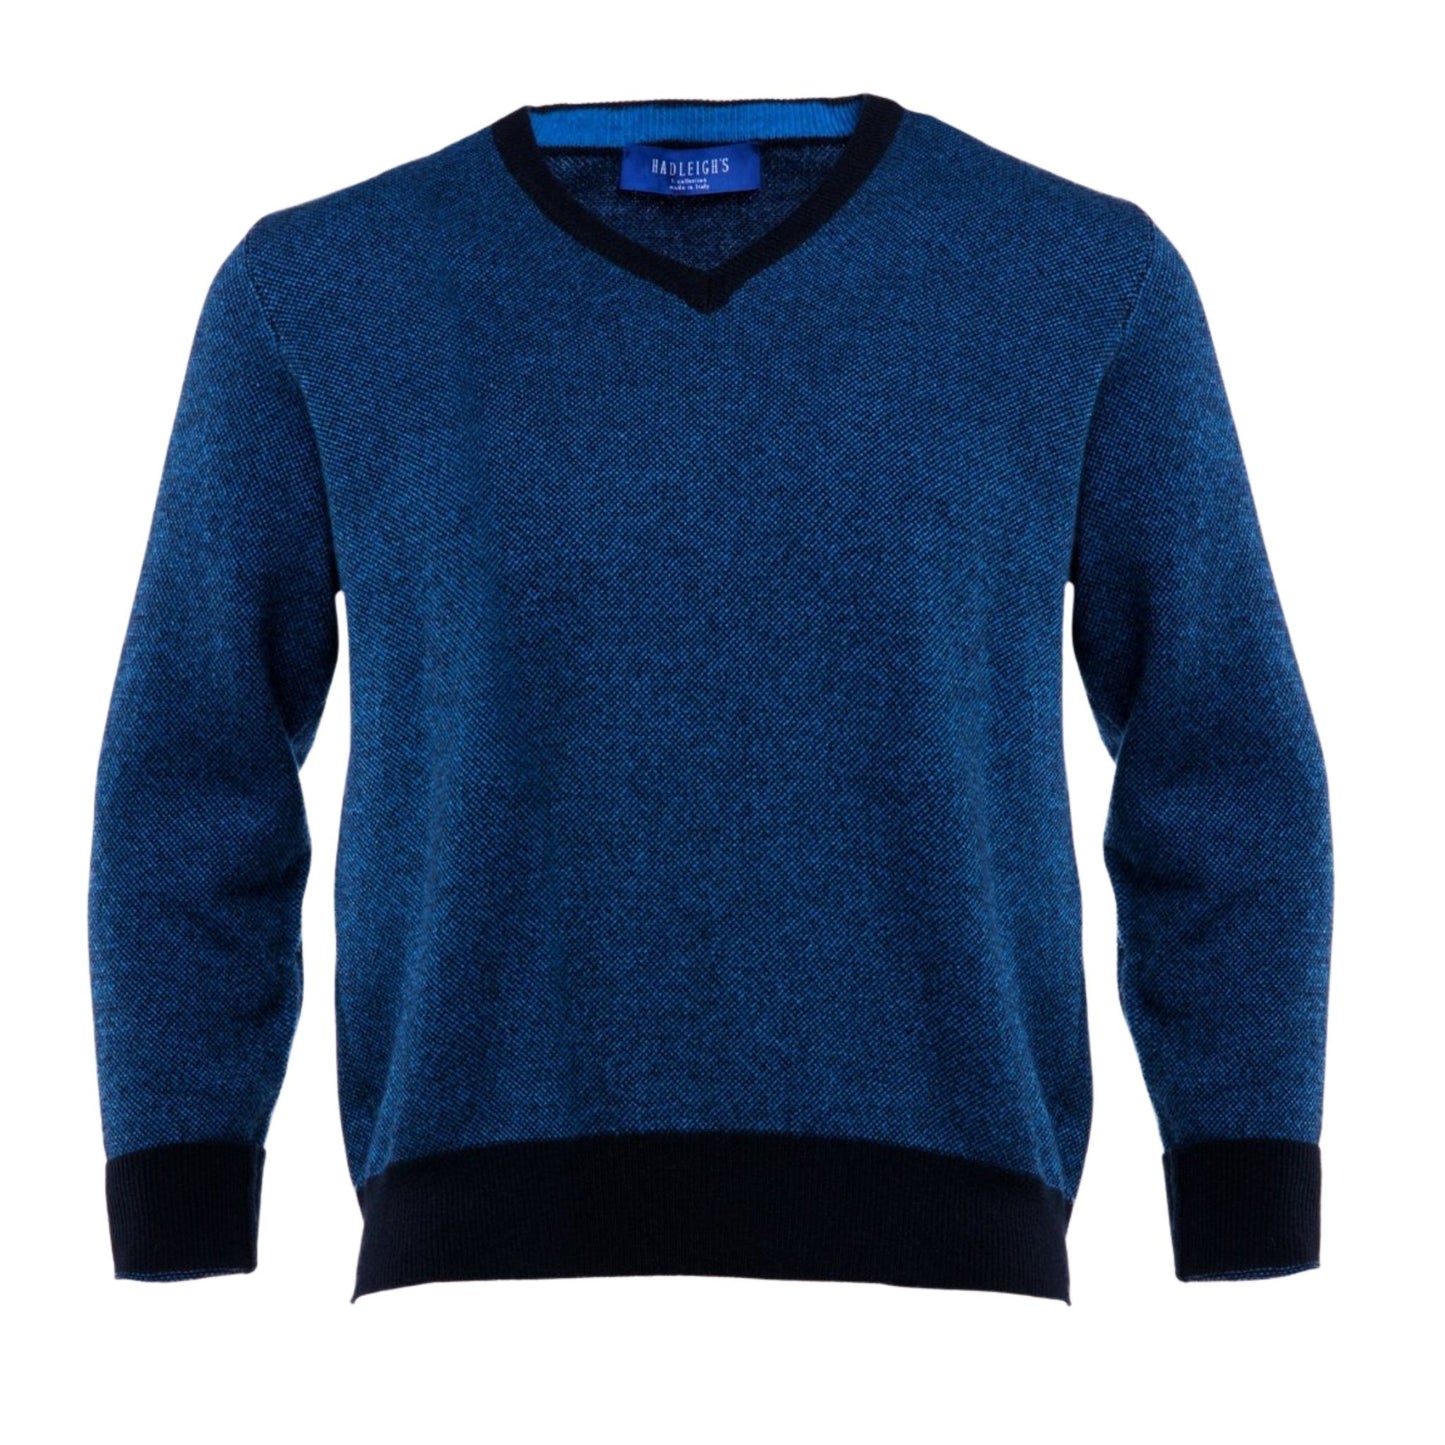 Contrast V-Neck Waffle Sweater in Navy